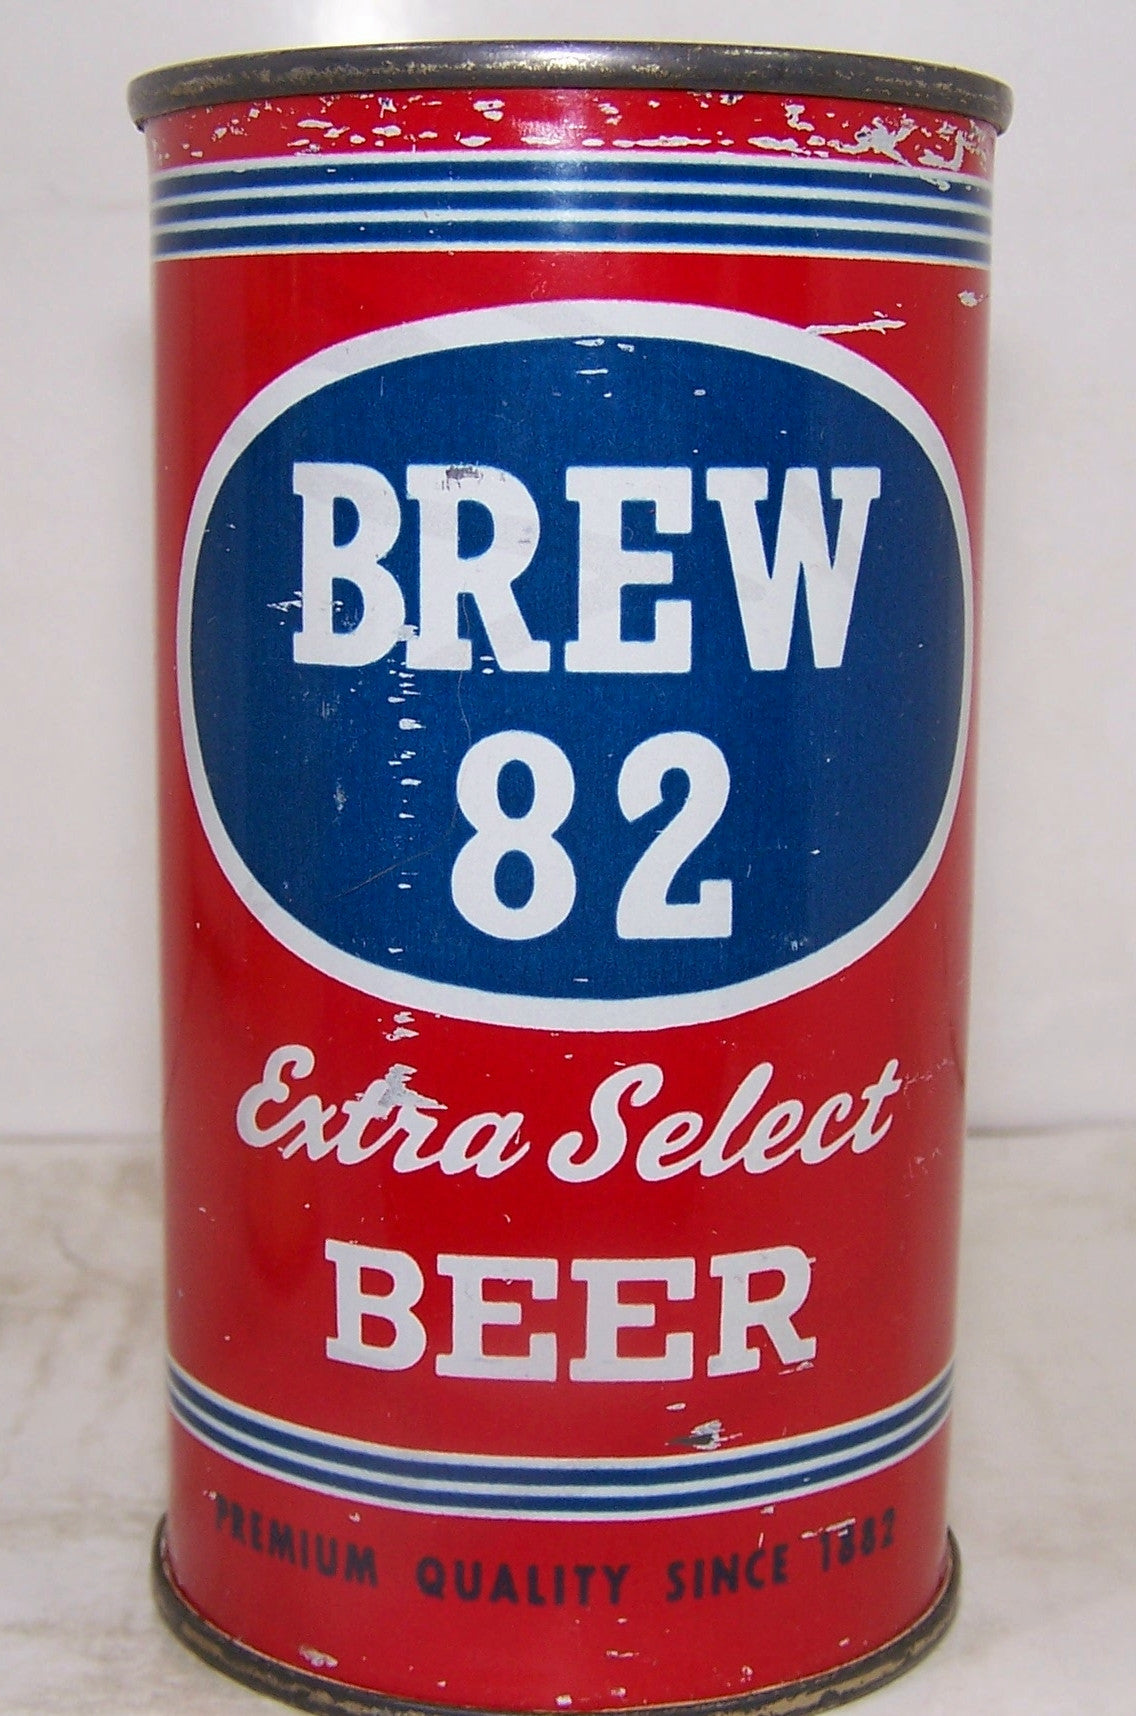 Brew 82 Extra Select Beer, USBC 41-28, Ohio, Grade 1- Sold 6/5/15